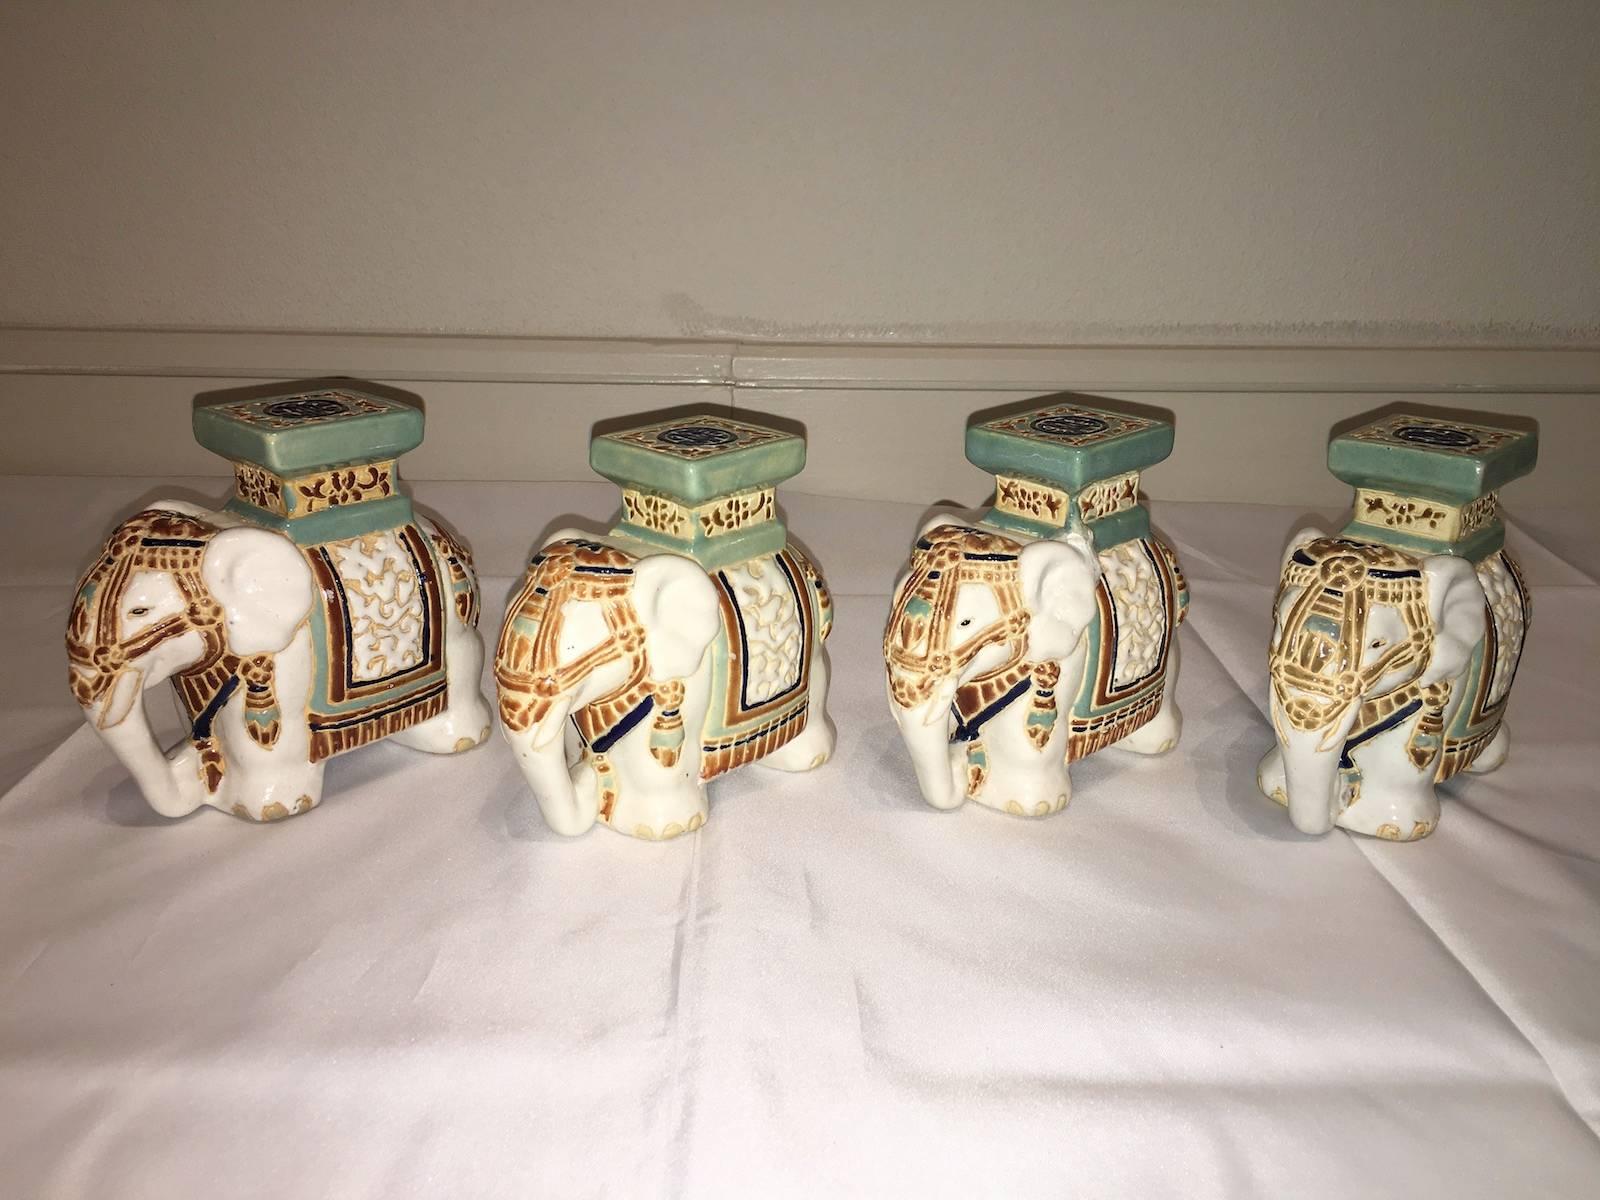 Lot of four petite Mid-20th century glazed ceramic elephant bookends, plant stands, flower pot stand. Handmade of ceramic. Nice addition to your home, patio or garden.